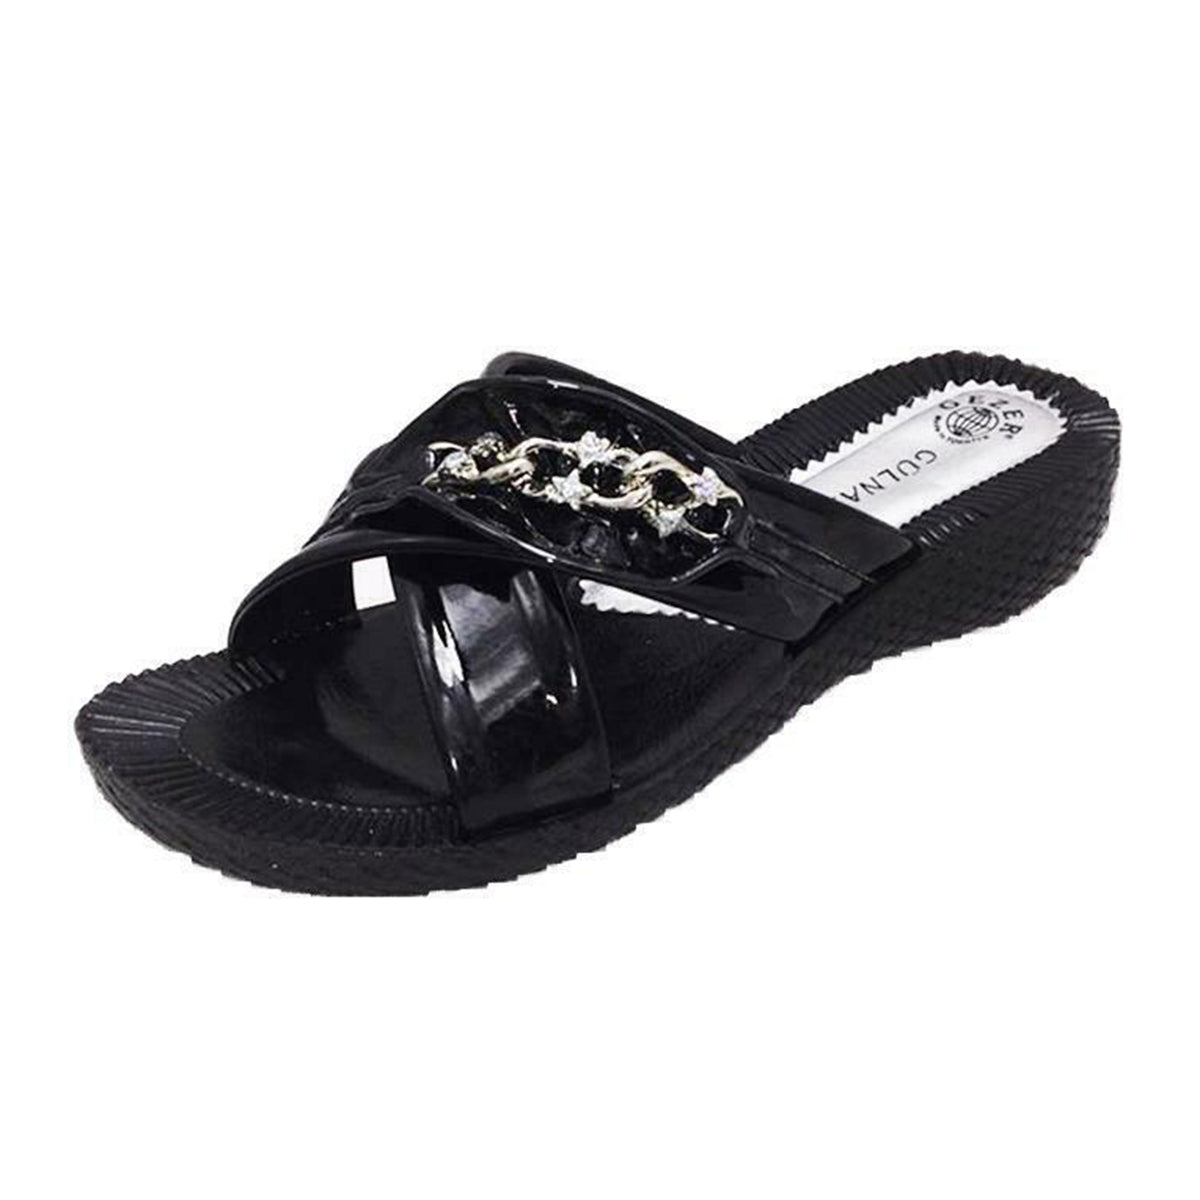 ROCKTHOSECURVES LOW WEDGE CUSHIONED SOLE SANDALS WITH DIAMANTE CHAIN